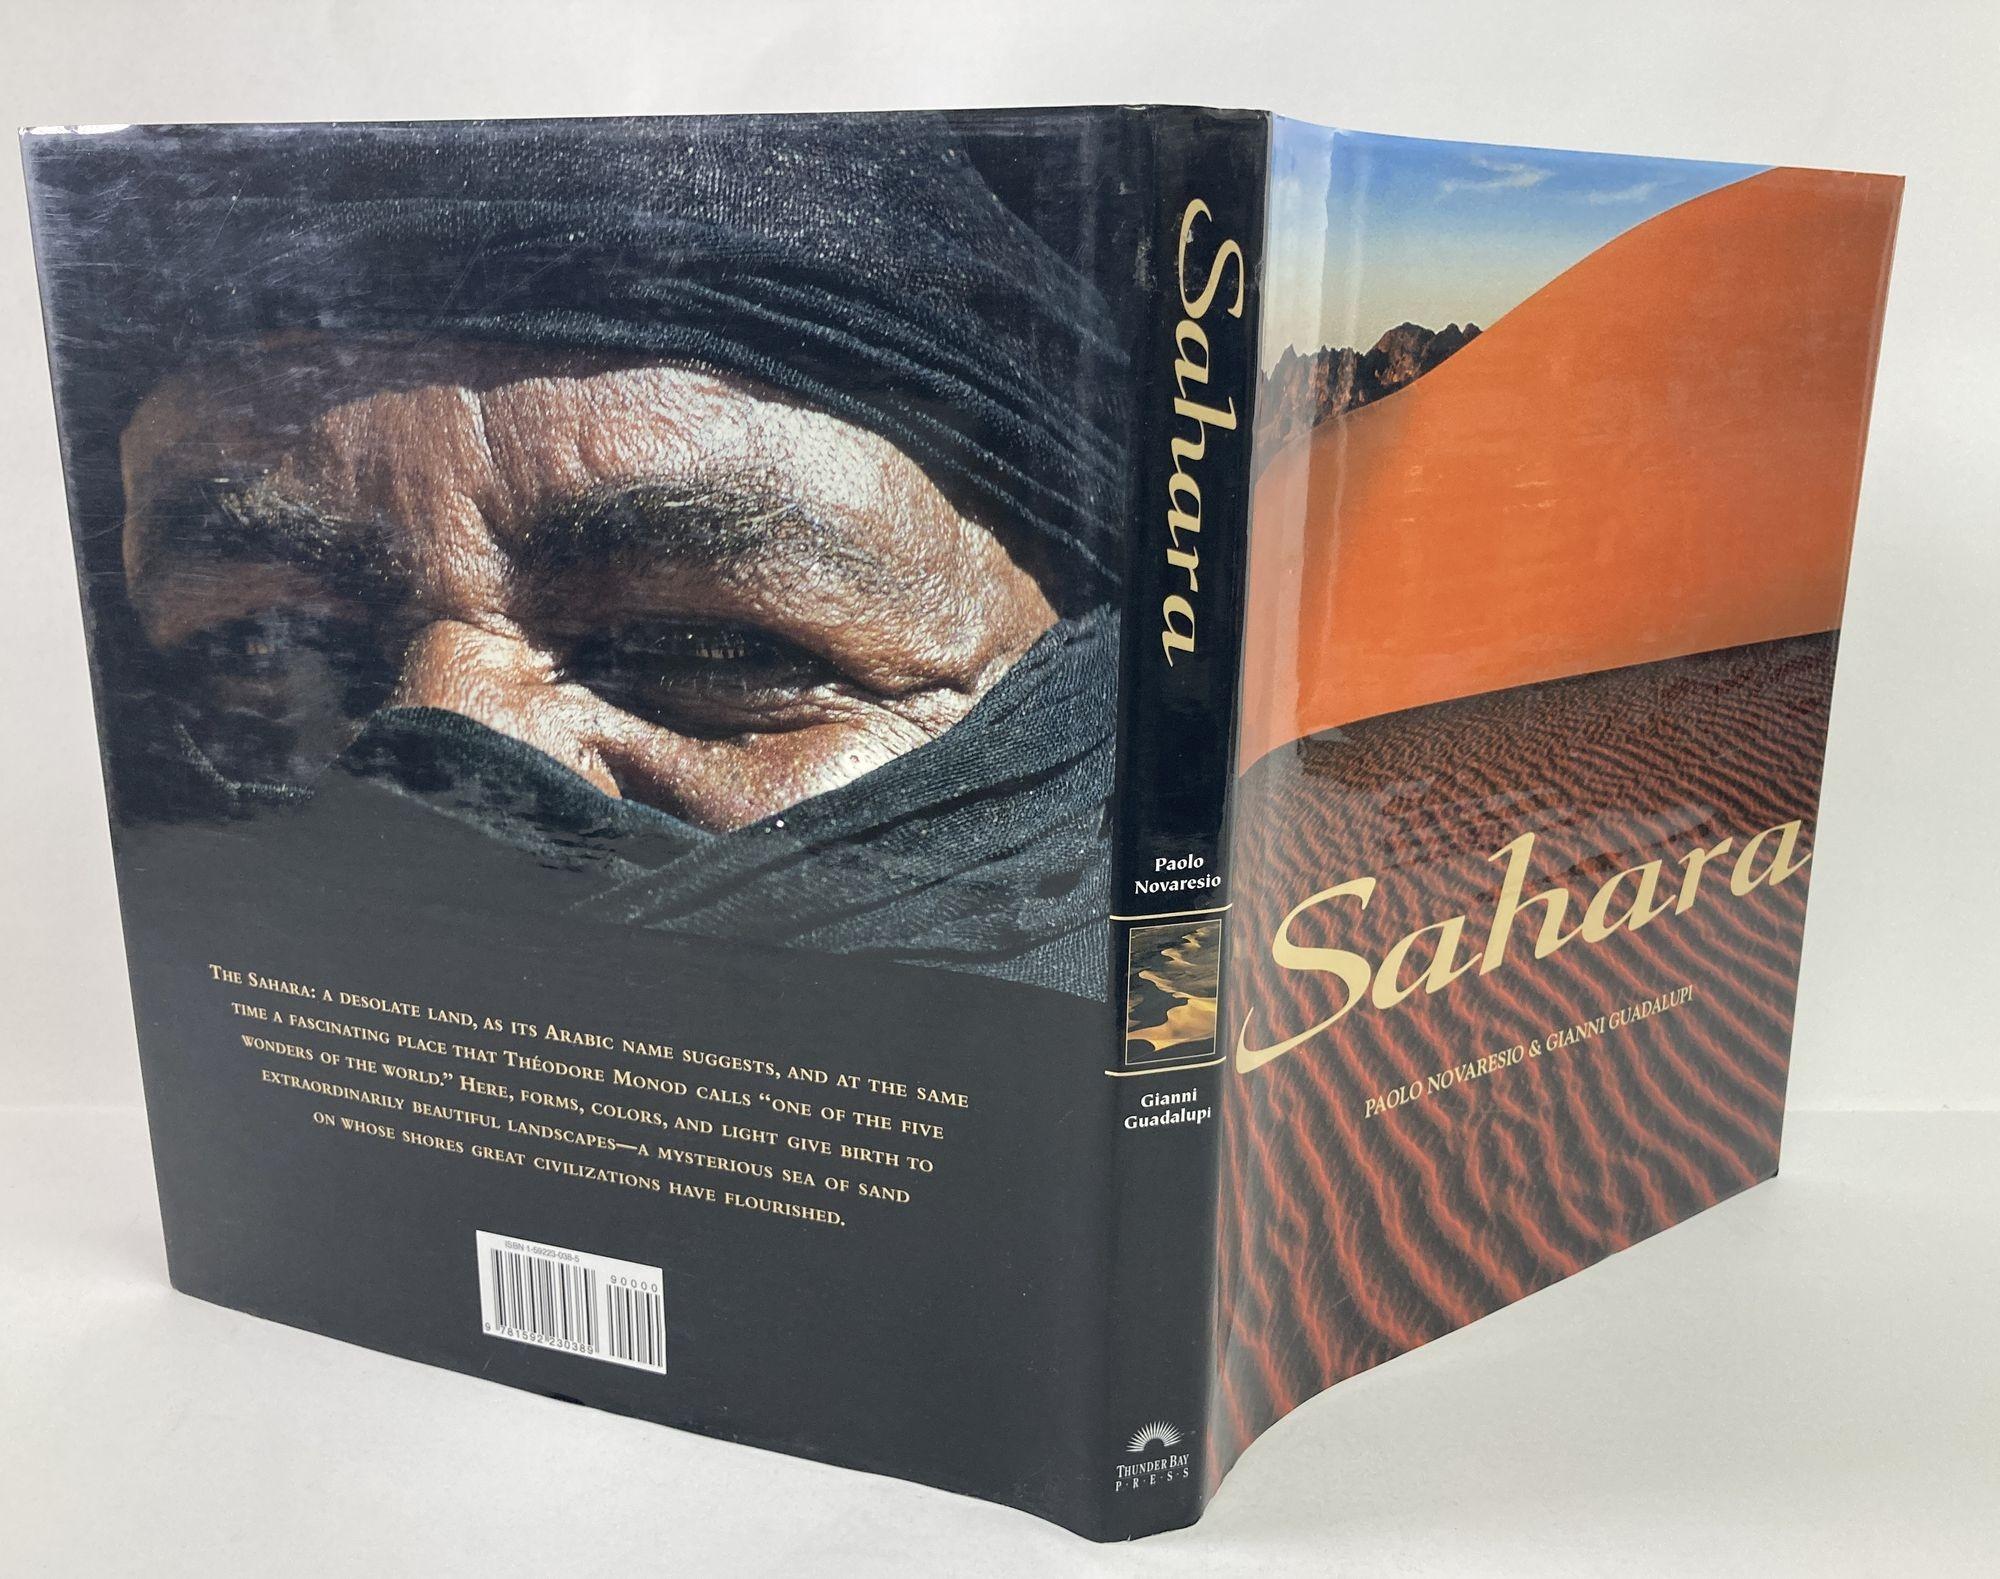 Expressionist Sahara, an Immense Ocean of Sand by Paolo Novaresio, Gianni Guadalupi Hardcover For Sale